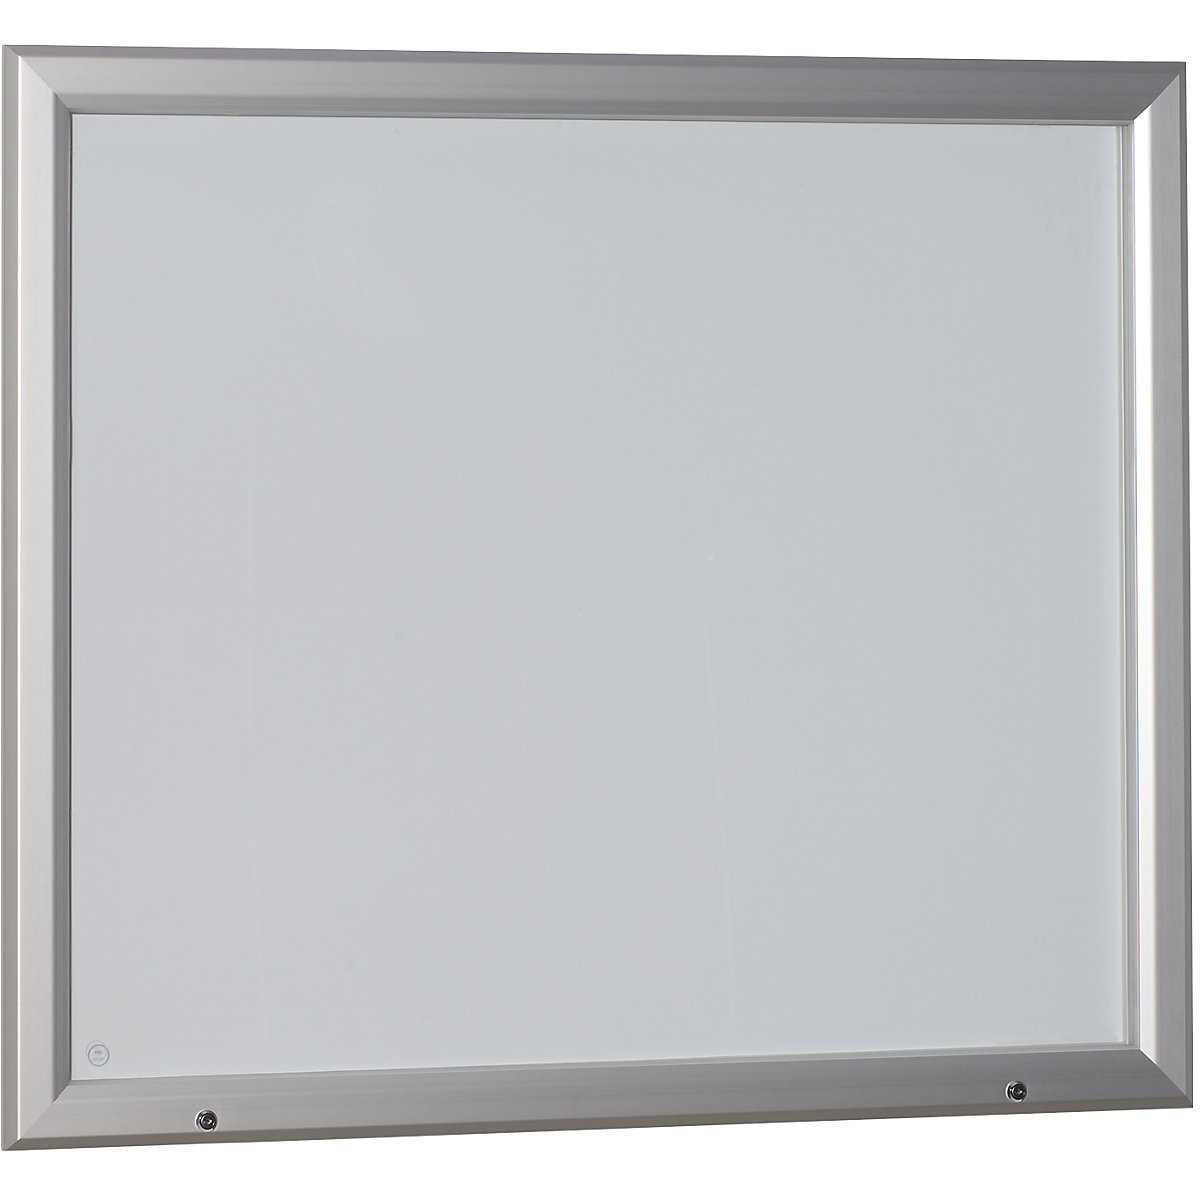 Display case, aluminium frame, for indoor and outdoor use - eurokraft pro